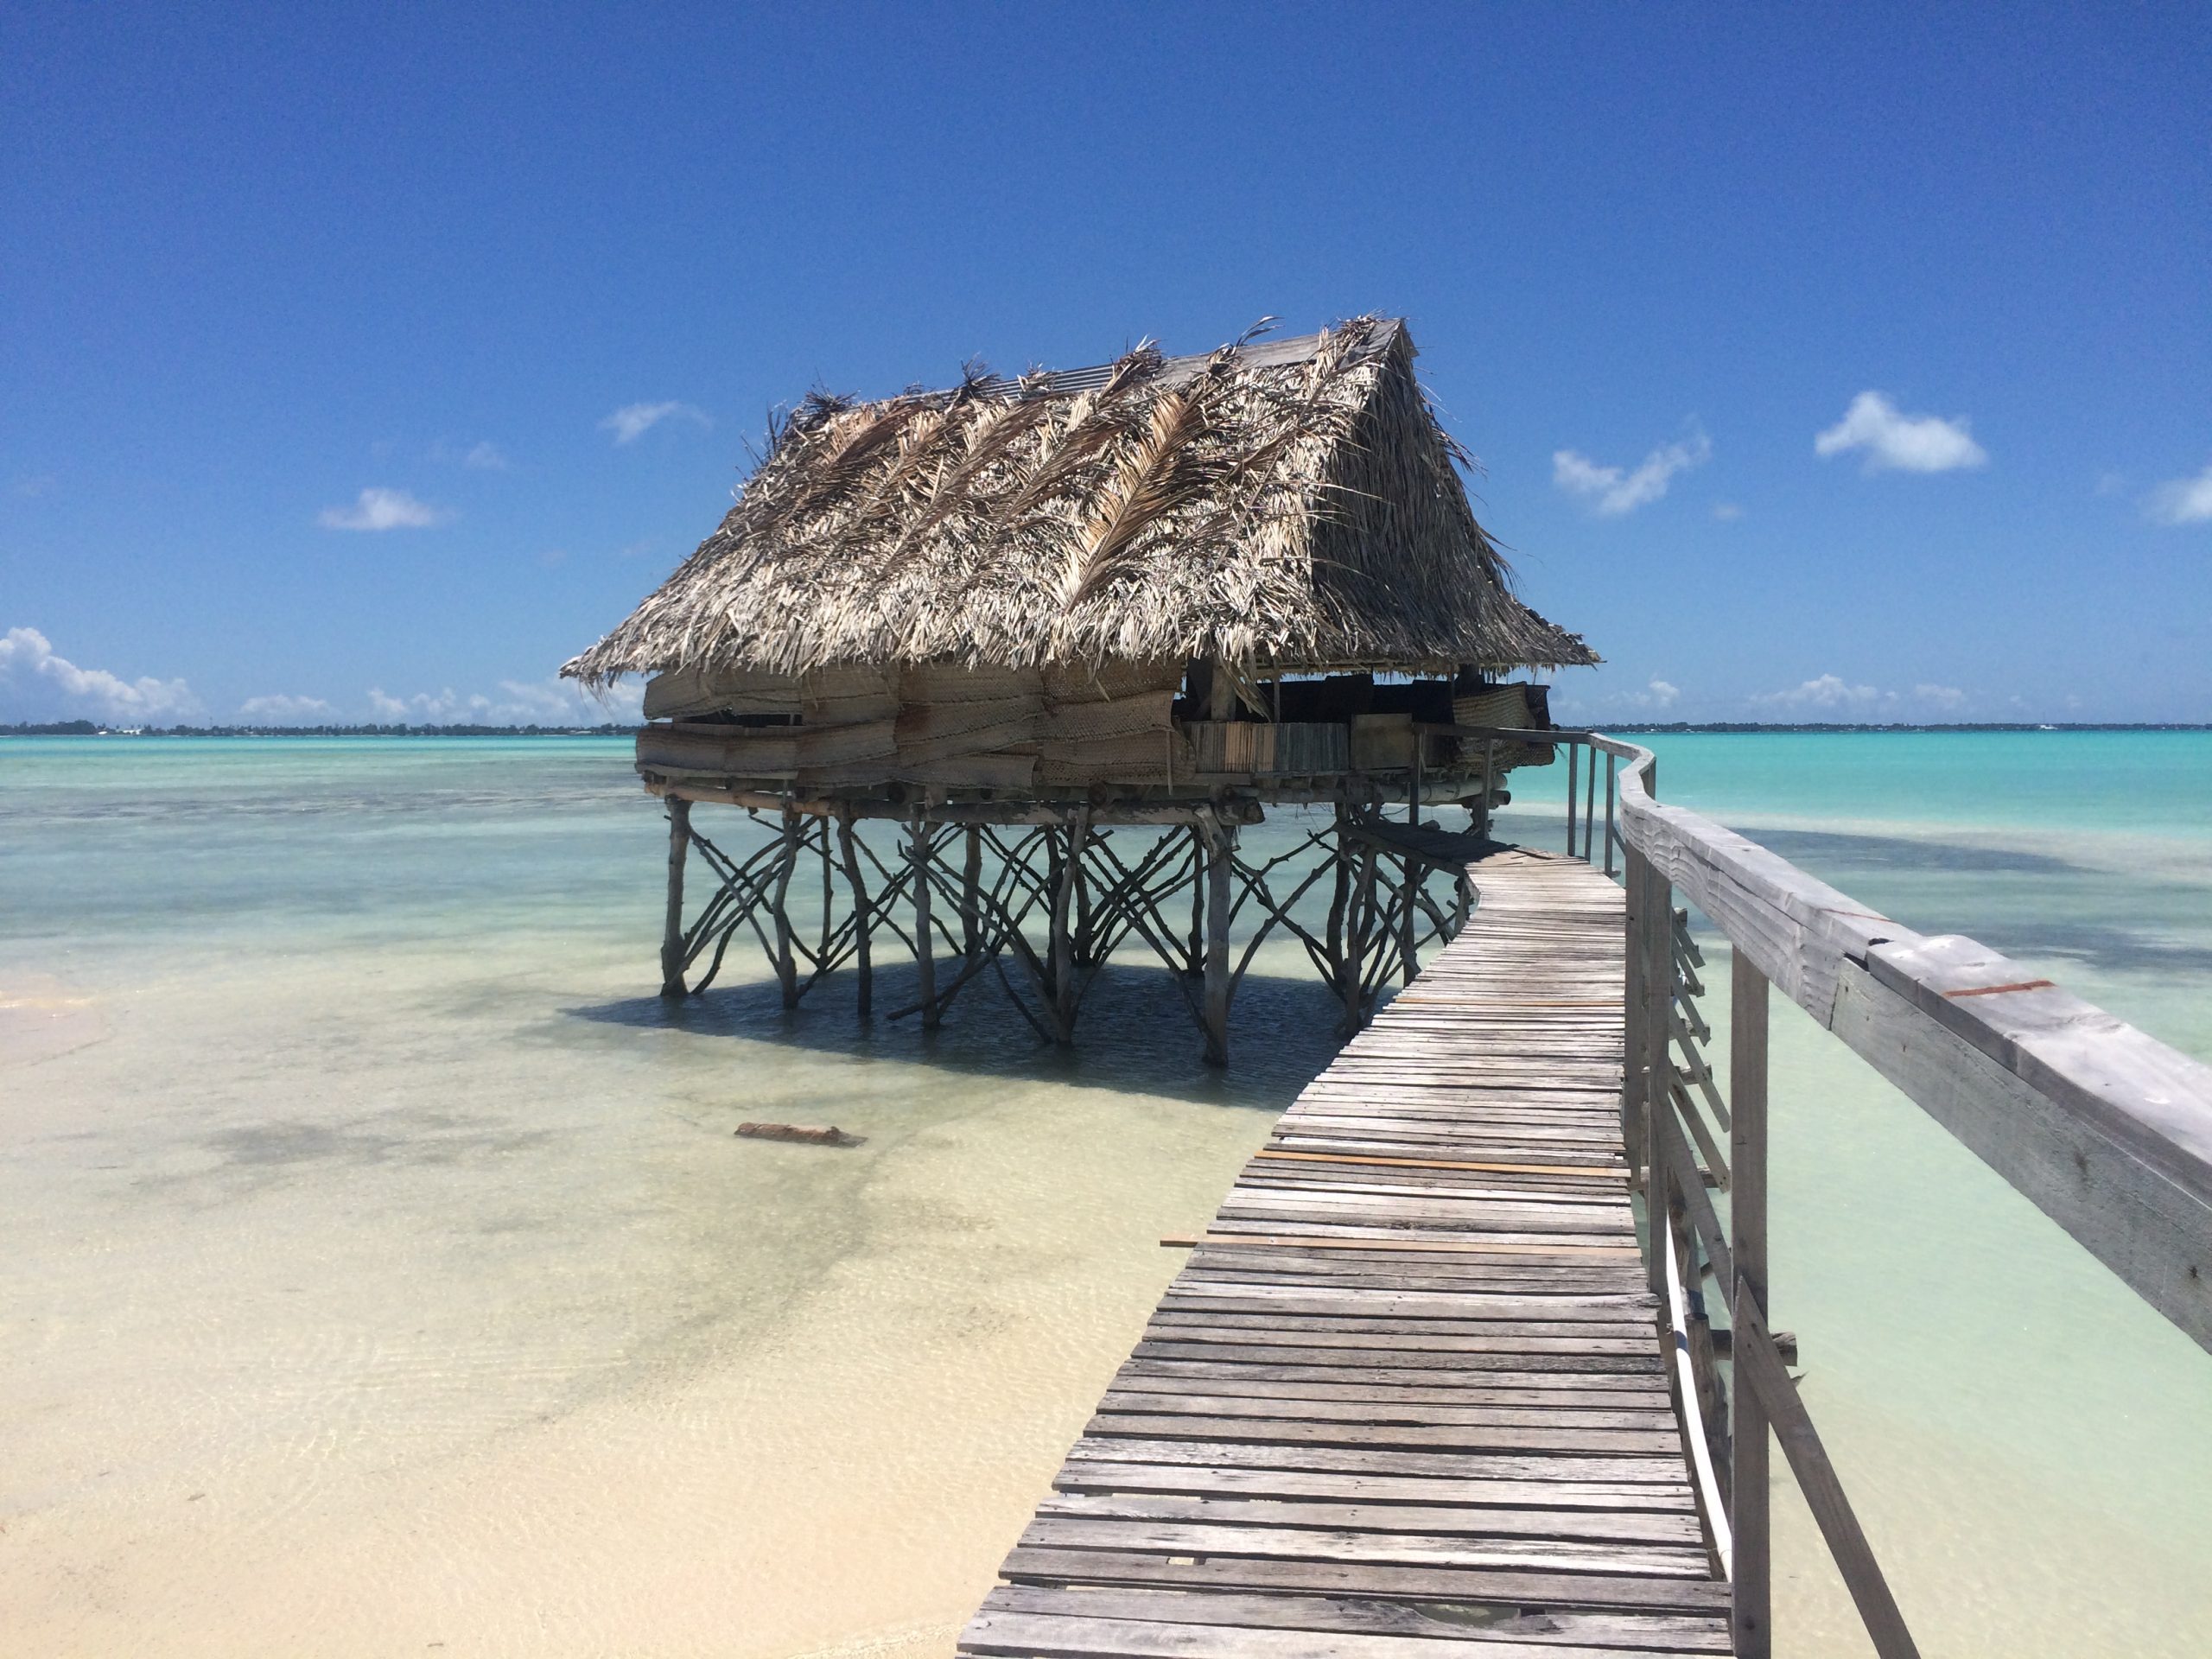 A picturesque view of a traditional Kiribati overwater buia, a thatched-roof hut built on stilts above the clear, turquoise waters of the Pacific Ocean. The buia is intricately constructed with local materials, showcasing Kiribati's traditional architecture. The image captures the unique charm of Kiribati's coastal living, highlighting the vibrant culture and connection to the surrounding natural beauty.